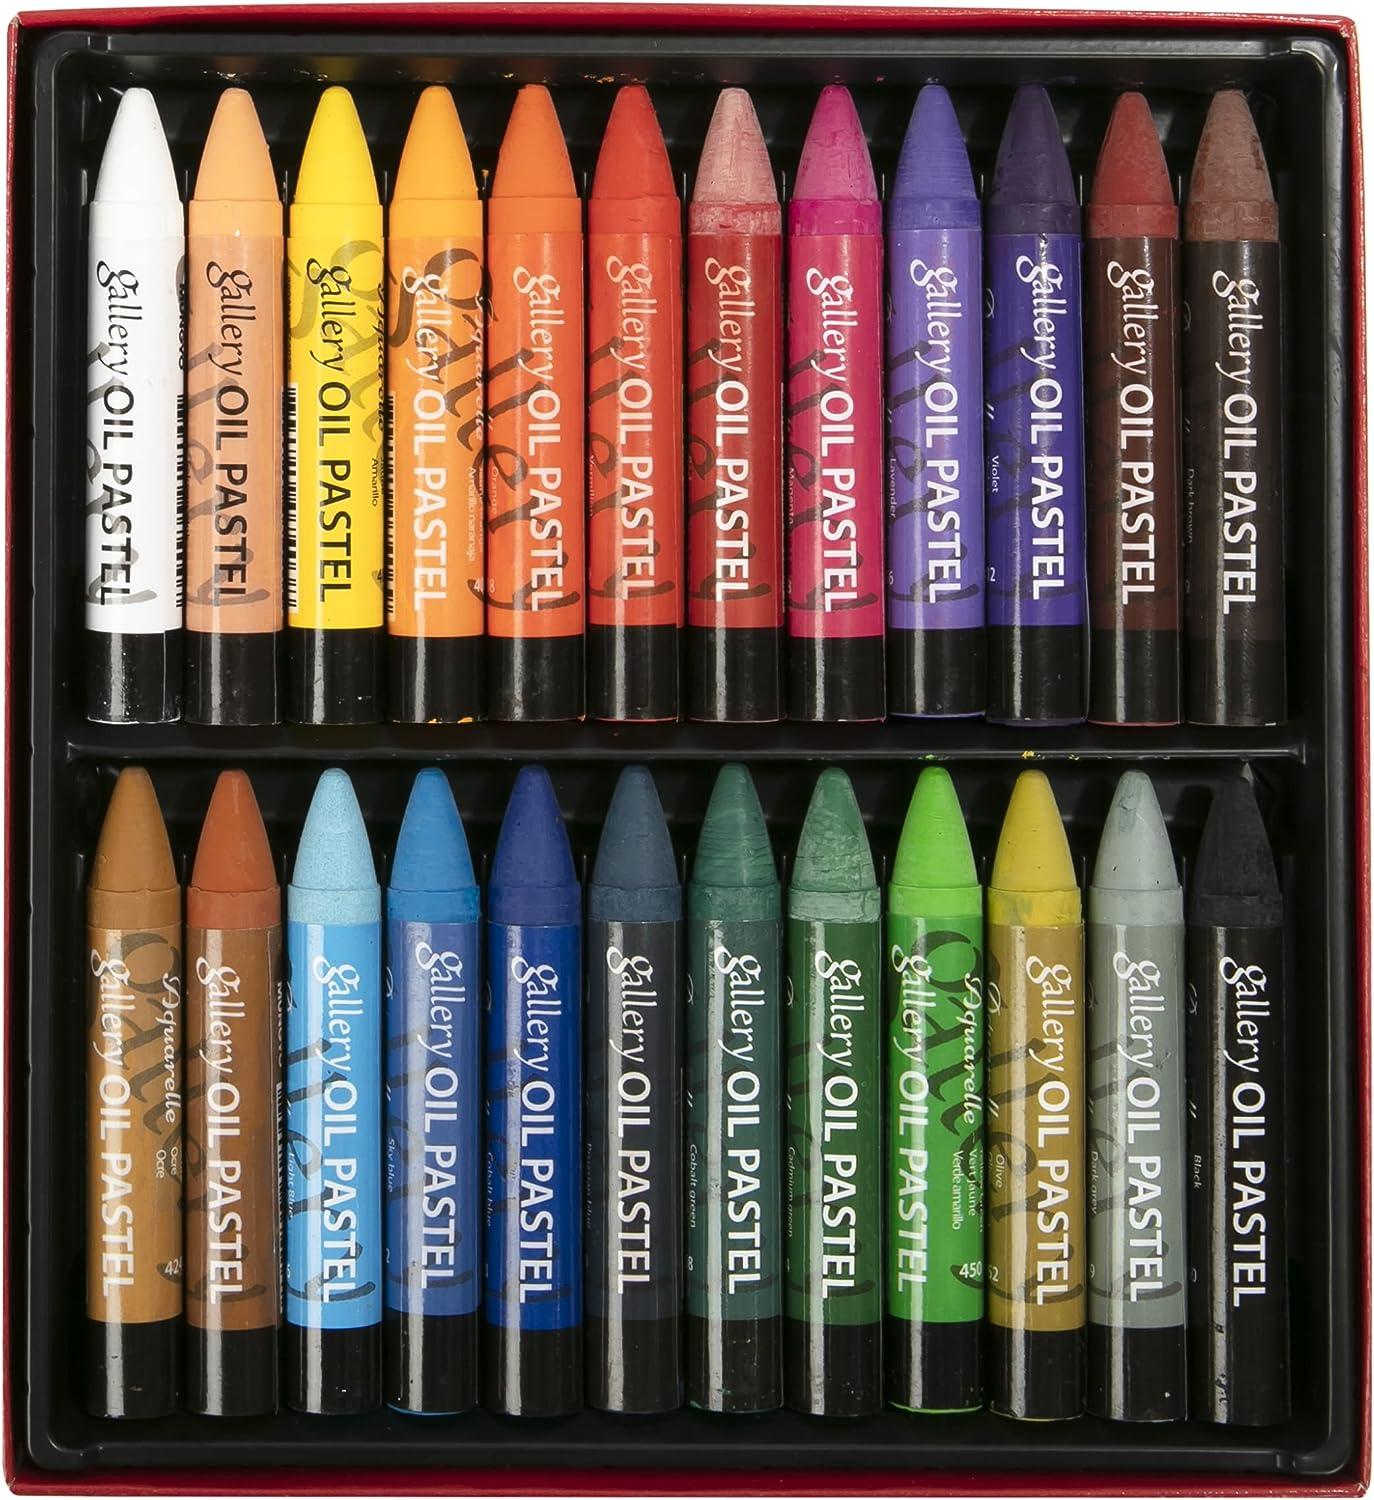 REVIEW & DEMO: MUNGYO WATER-SOLUBLE OIL PASTELS 